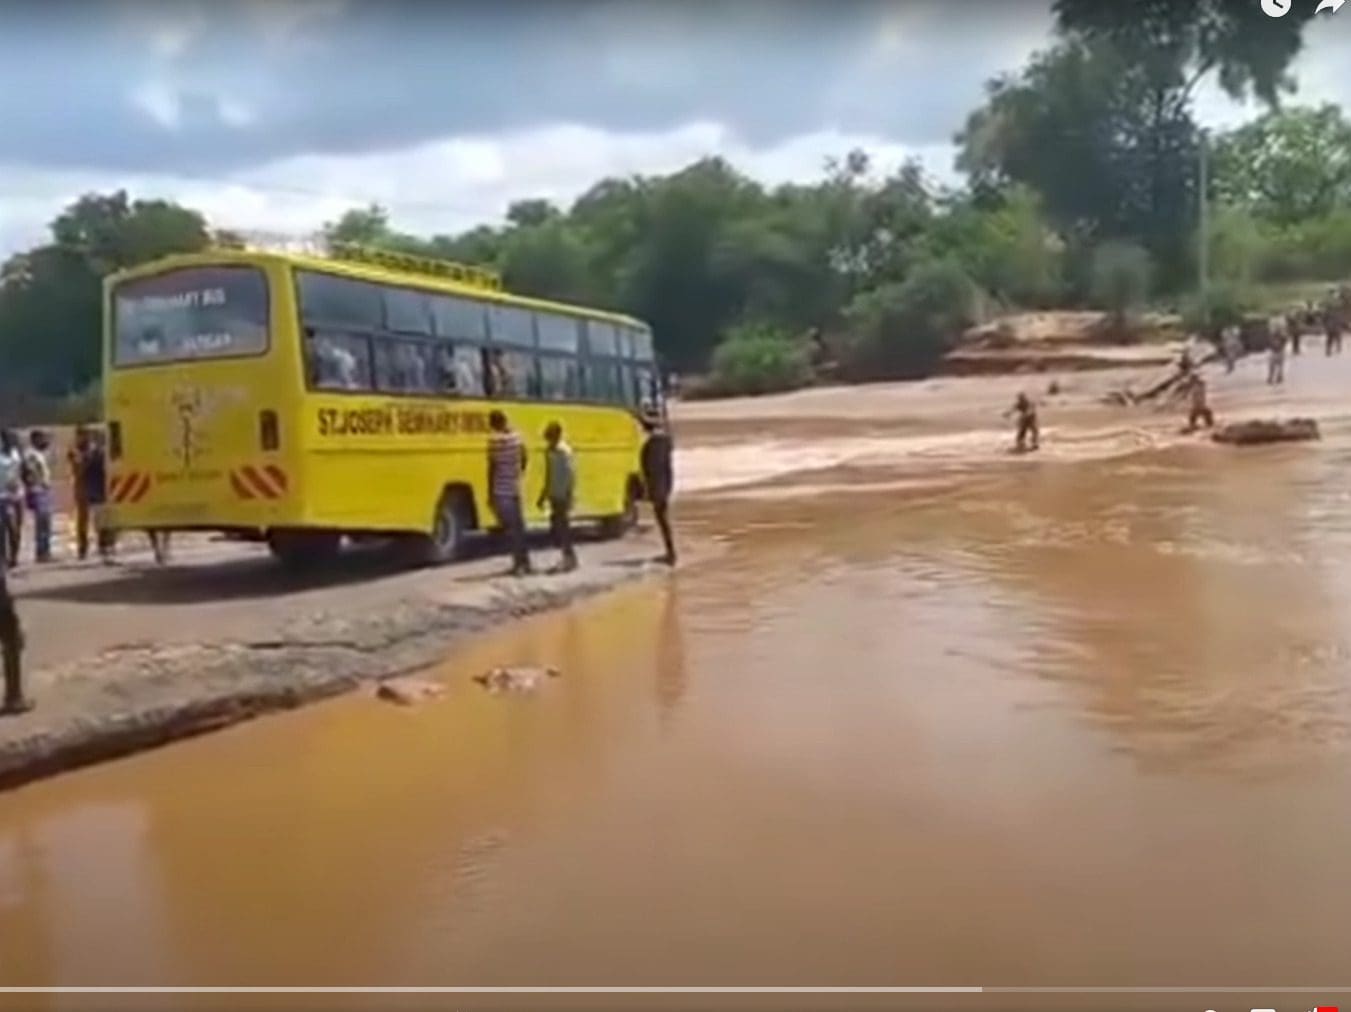 Seconds before the bus tipped into the flooded Enziu River. So far, the death toll is at 33, including several children